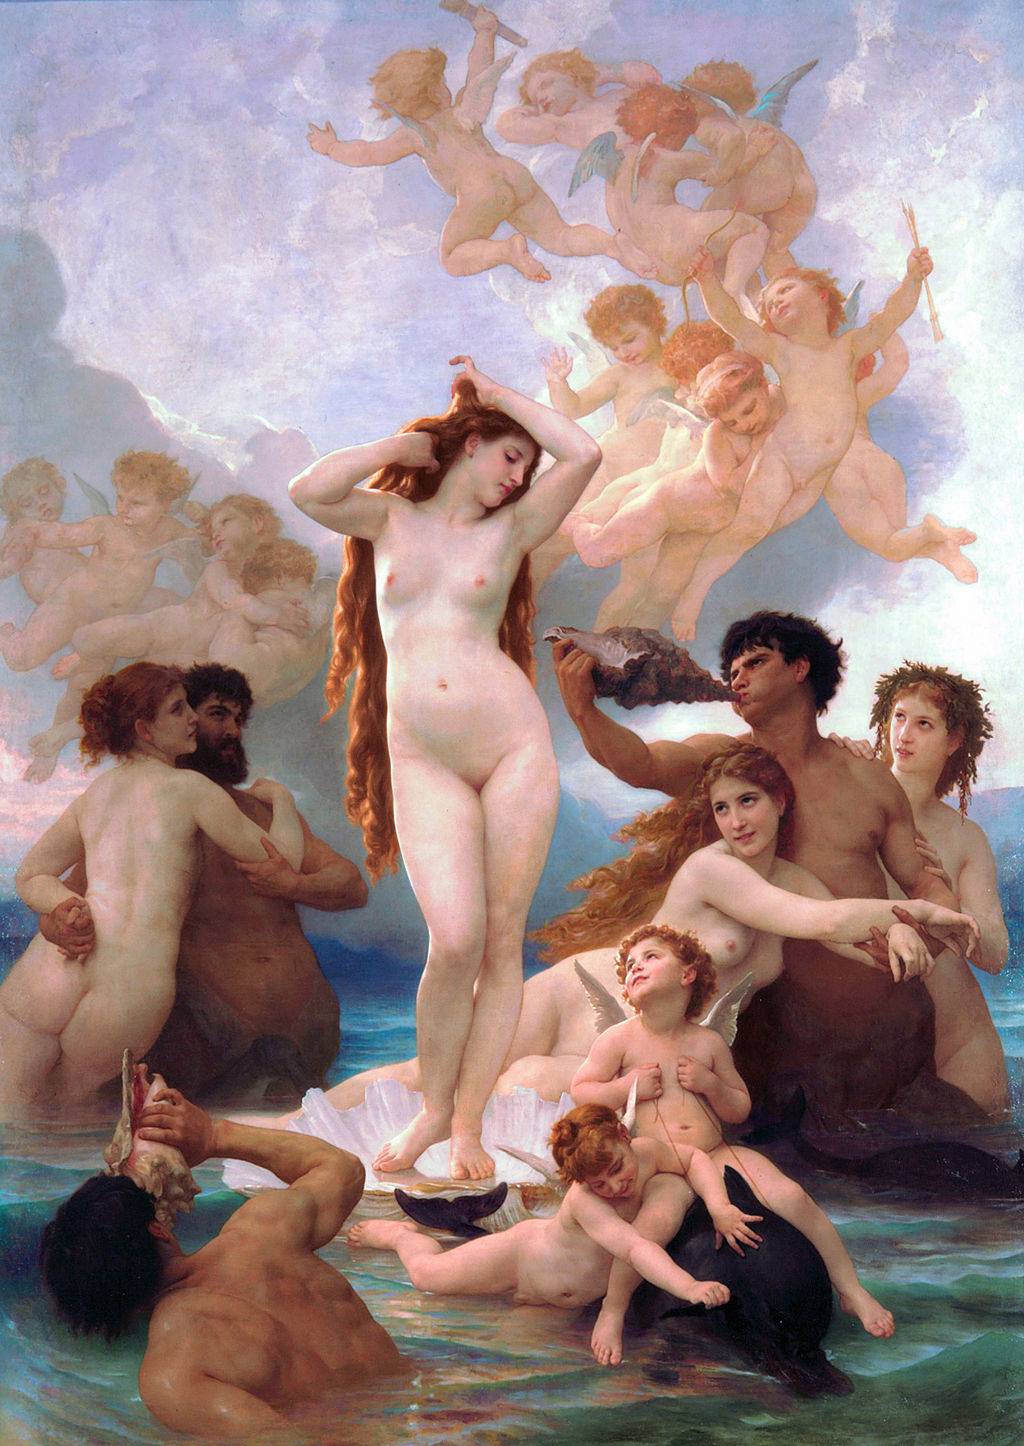 The Birth of Venus by William-Adolphe Bouguereau. Venus emerges surrounded by lovers